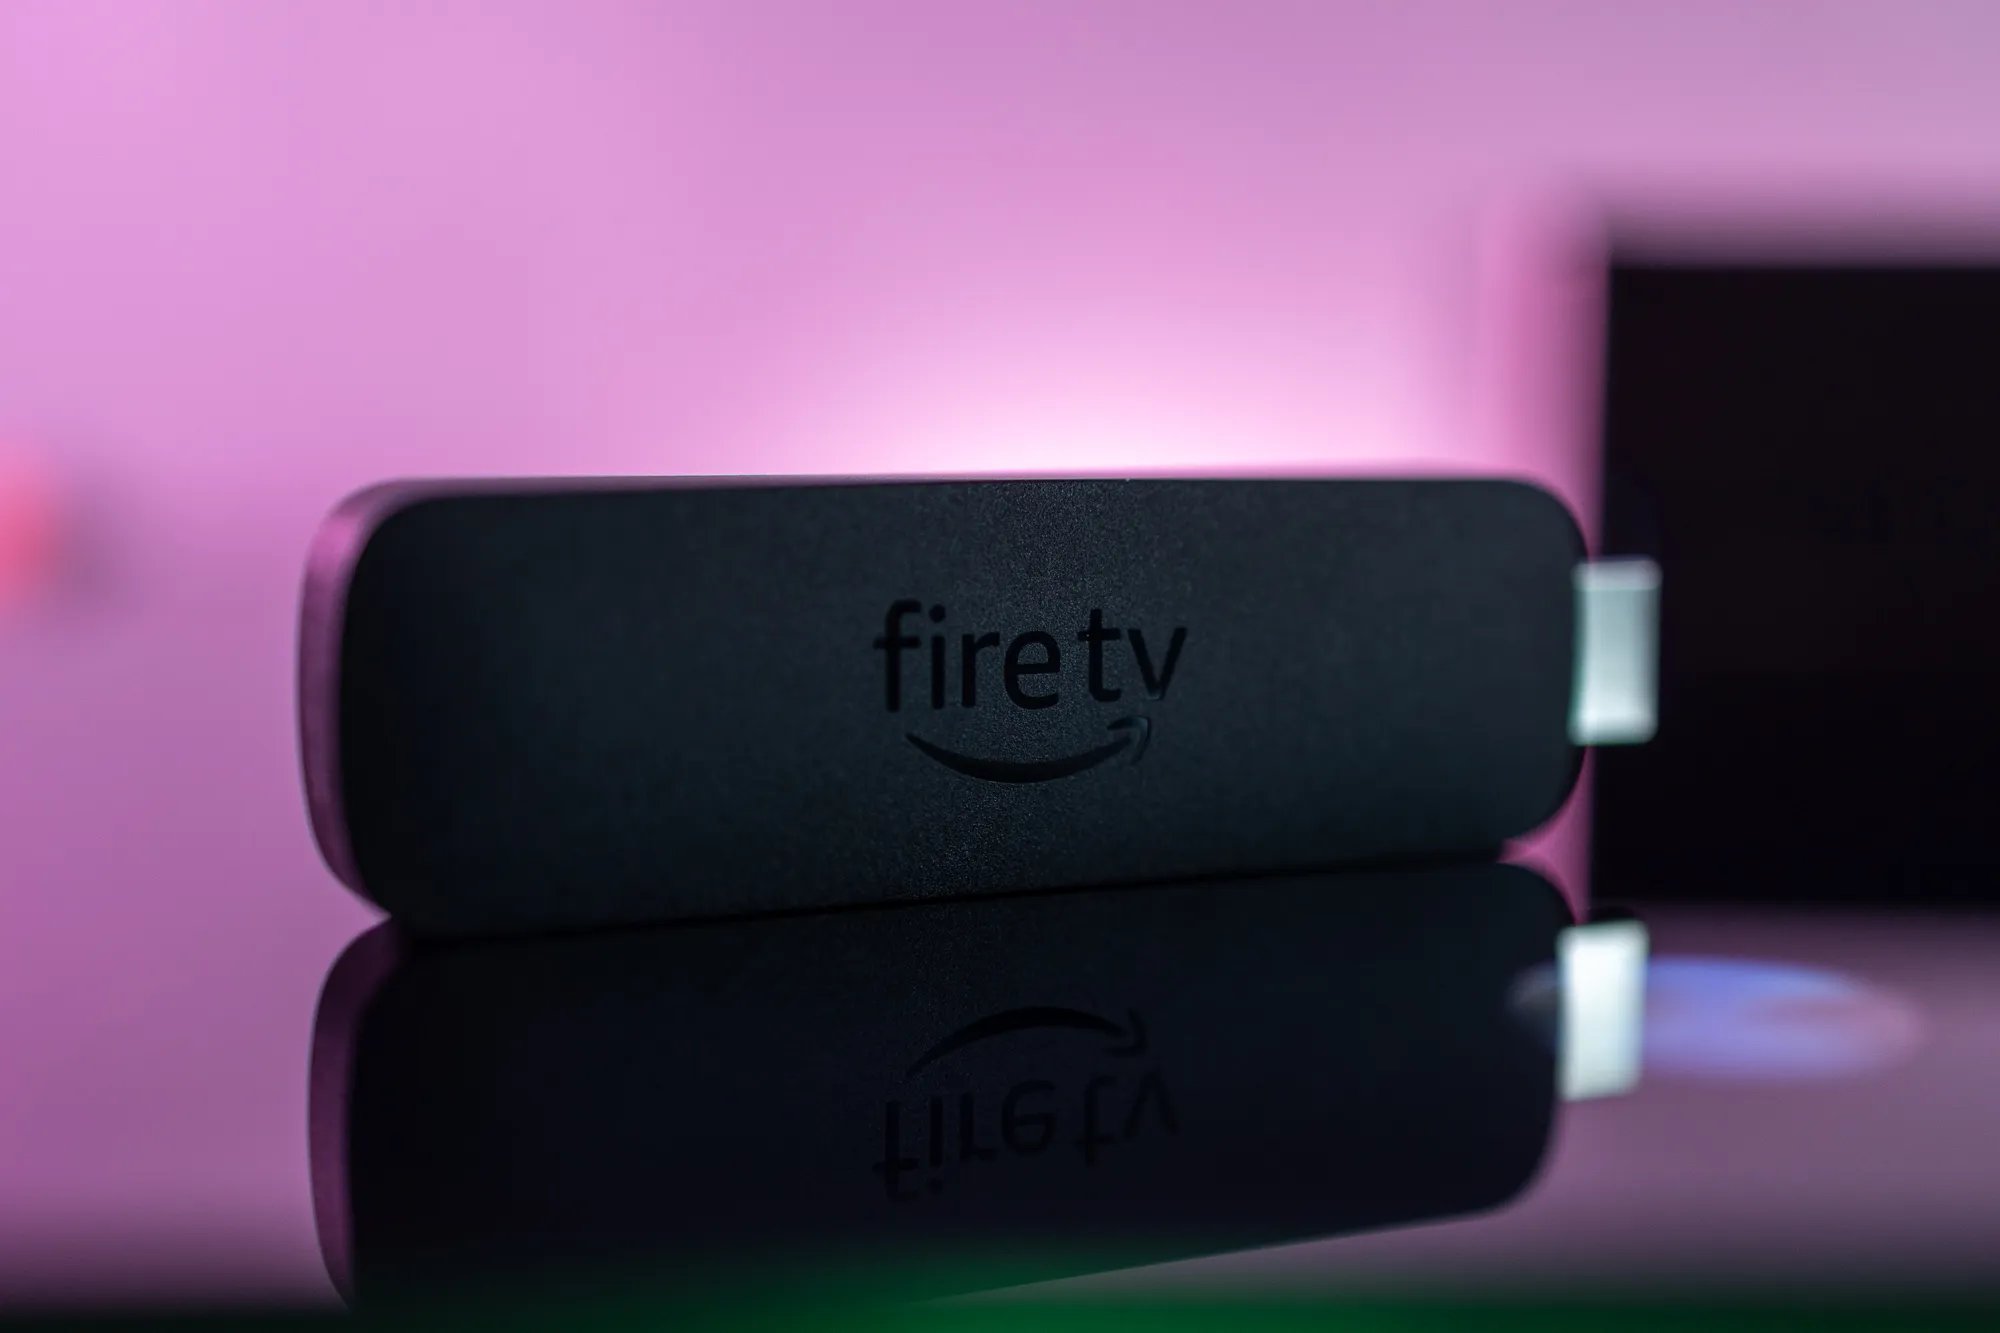 The Surprising Lifespan Of An Amazon Fire Stick Revealed!